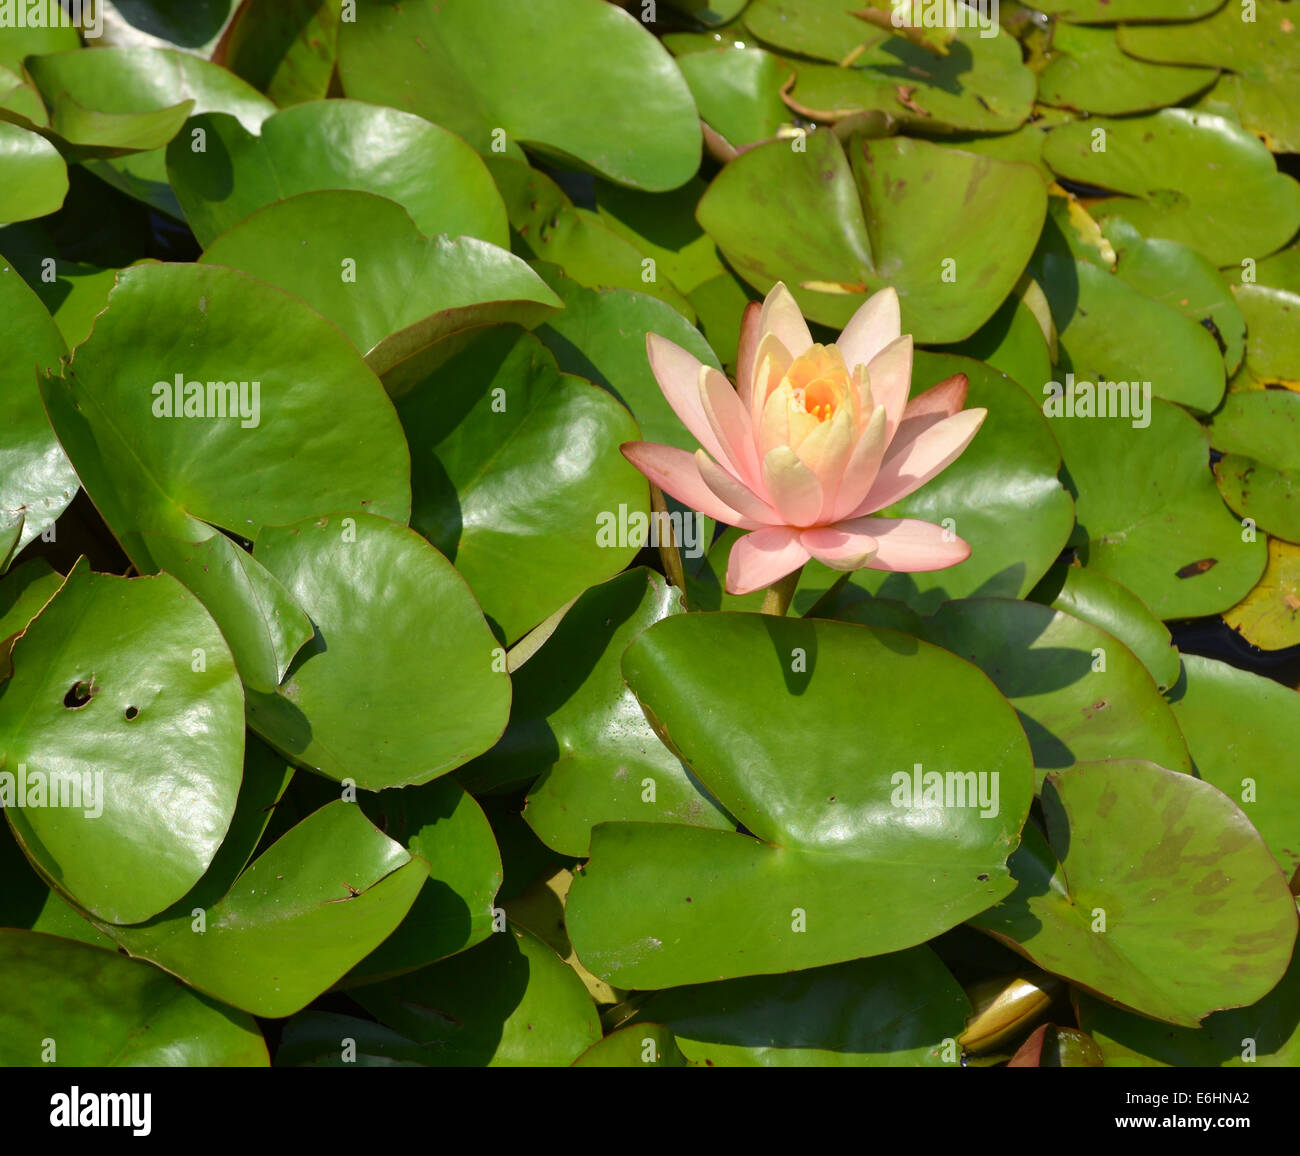 Water lilies Stock Photo